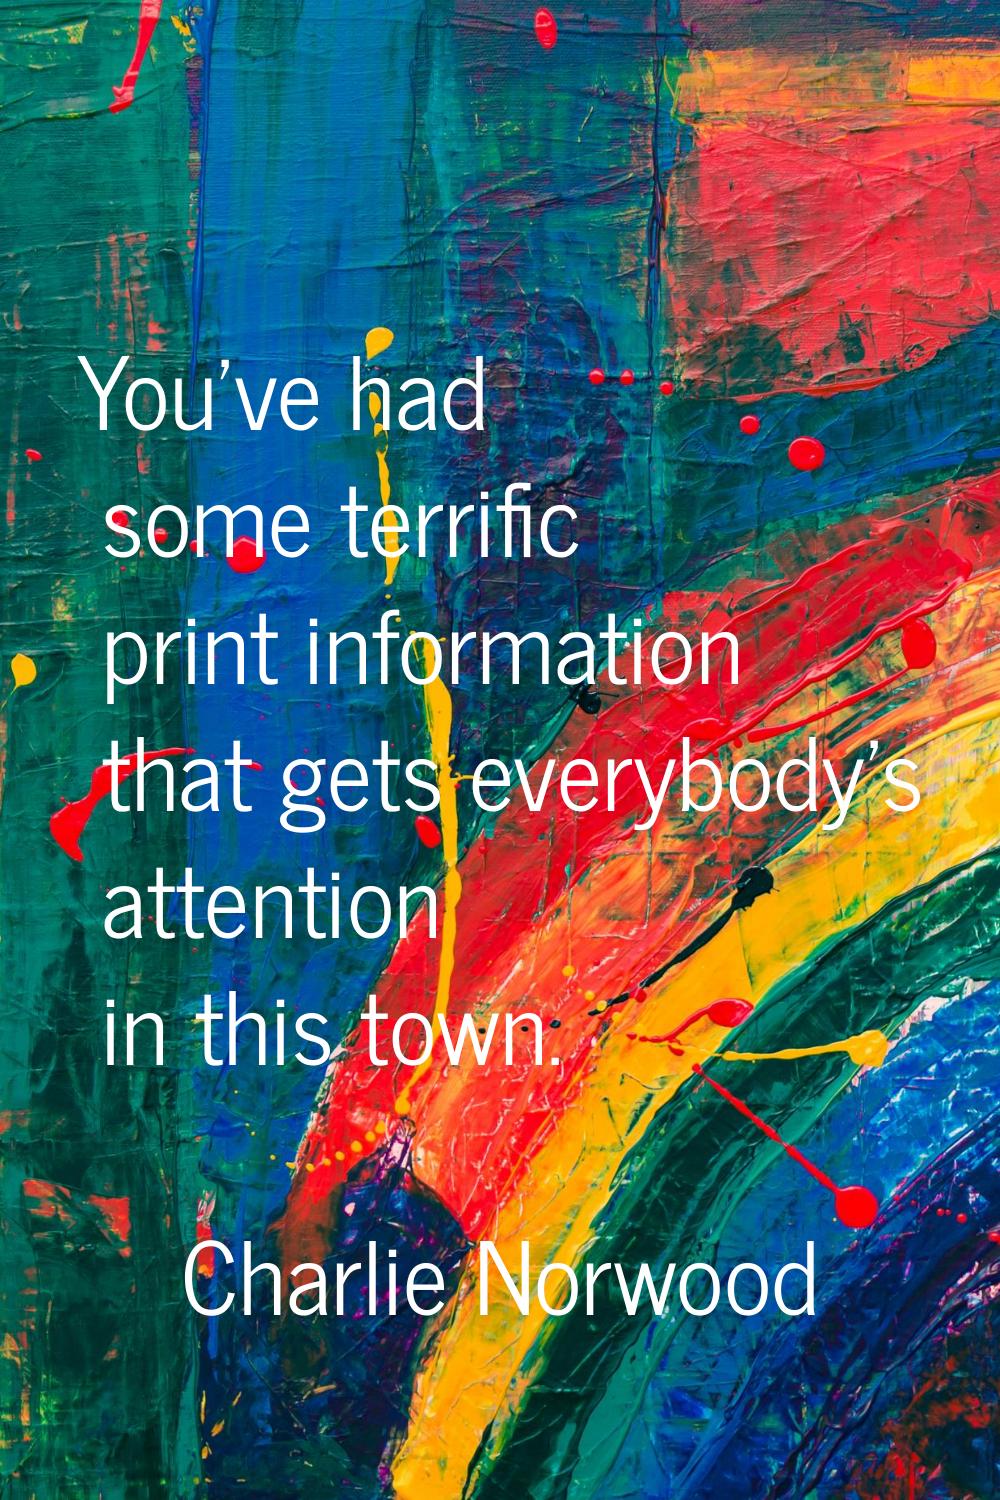 You've had some terrific print information that gets everybody's attention in this town.